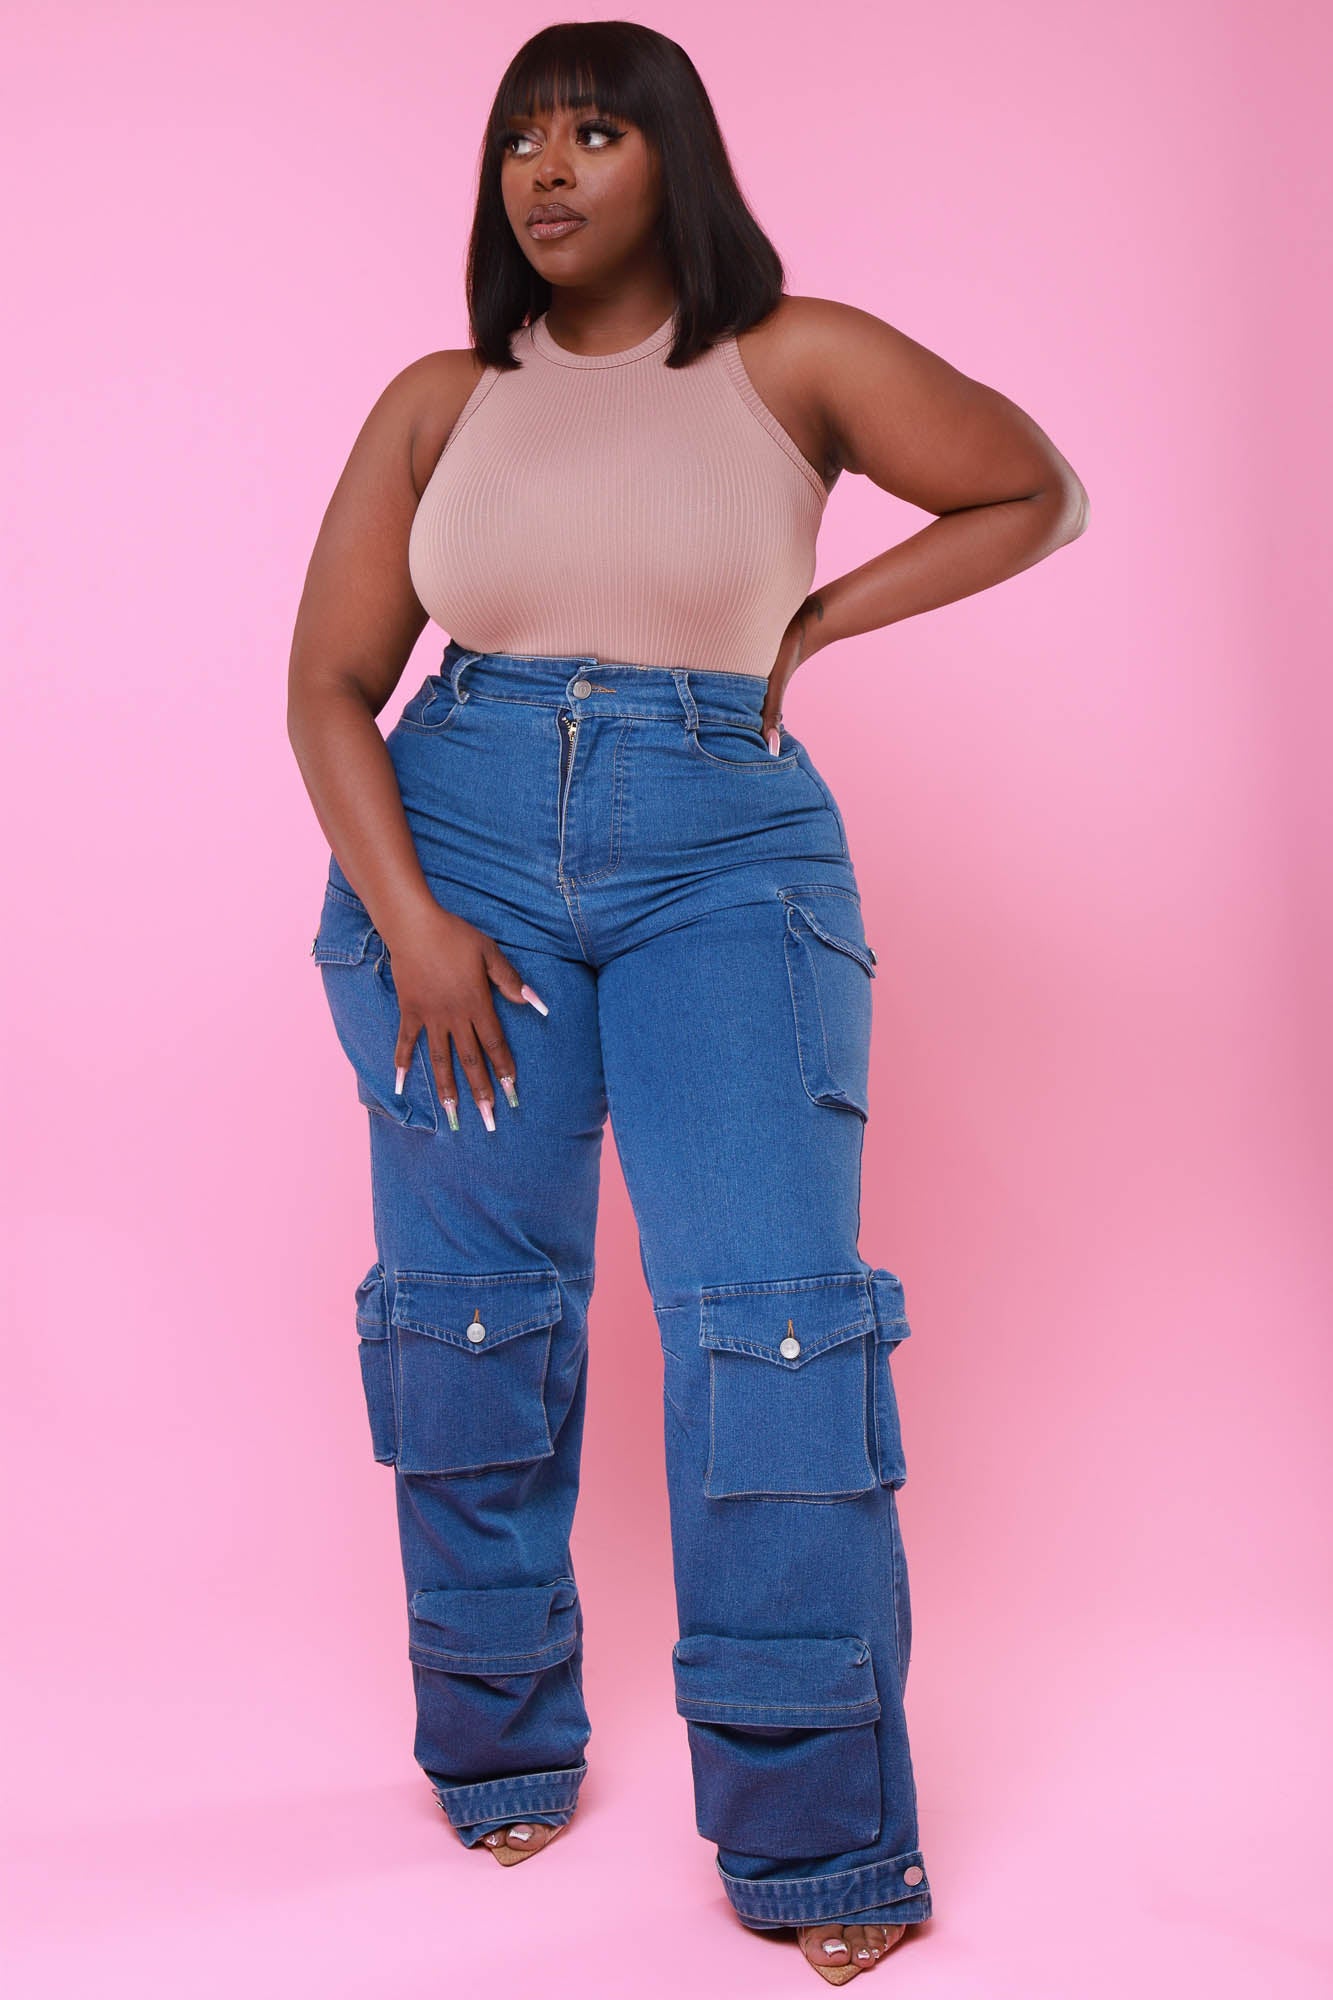 High Waisted Cargo Pants - Pink Wash